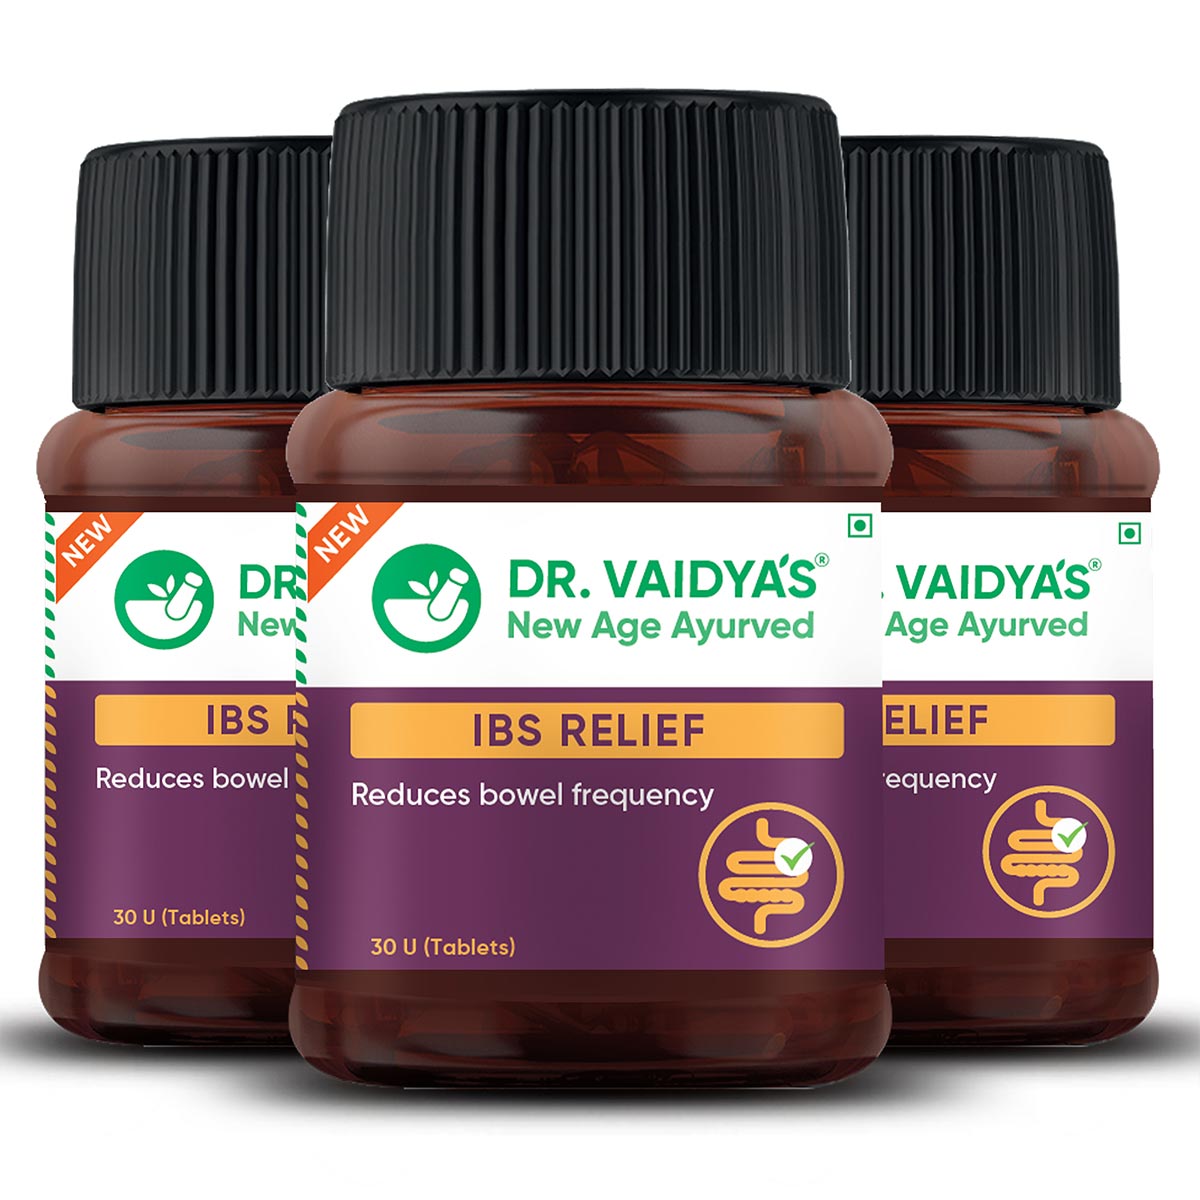 IBS Relief: Helps Relieve Cramps, Bloating & Normalize Bowel Movements